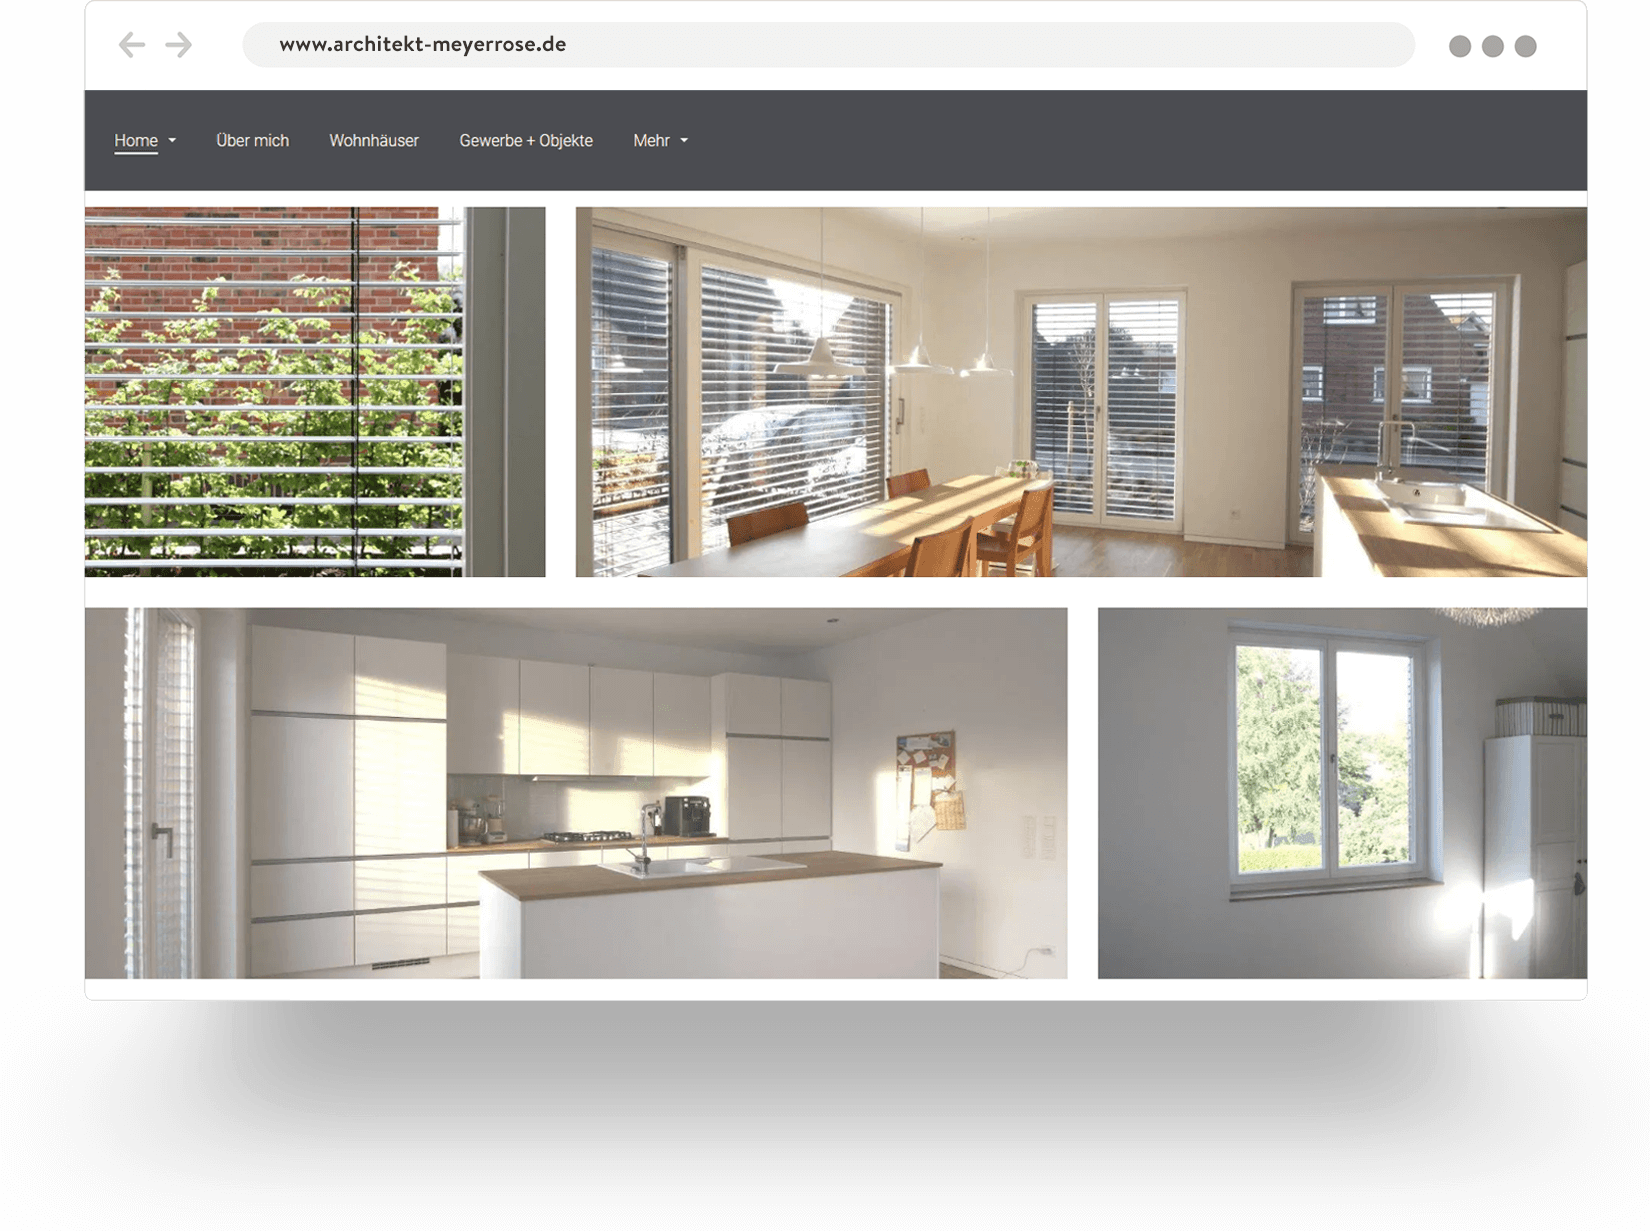 Example of an architect's website built with Jimdo showing modern, white interiors with large windows